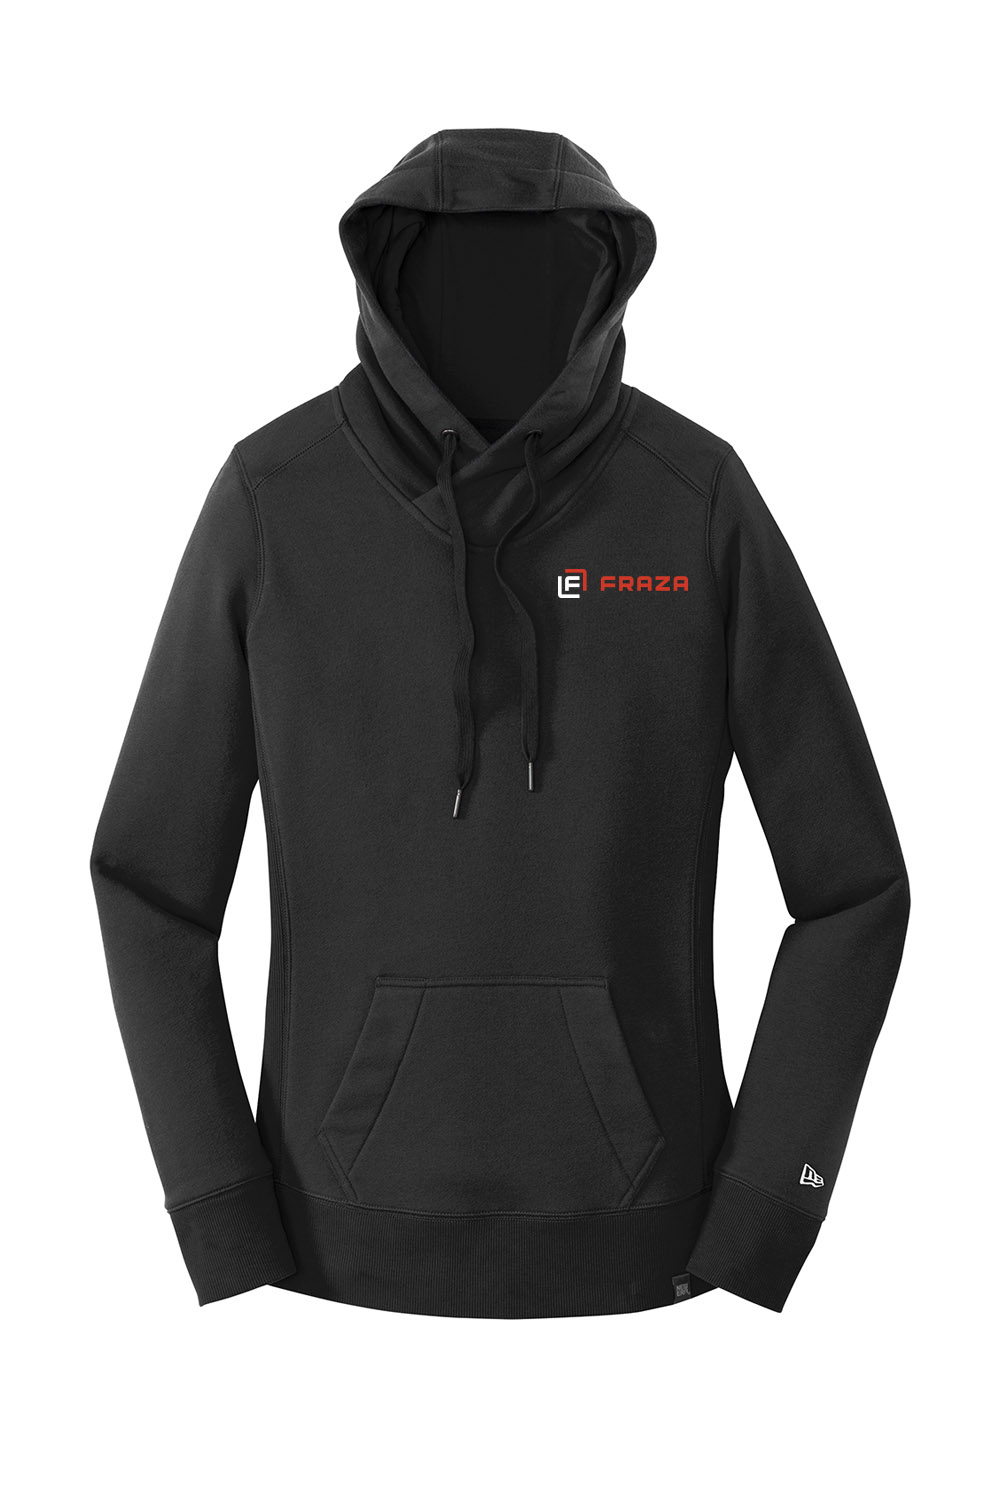 New Era® Ladies French Terry Pullover Hoodie - Fraza Company Store